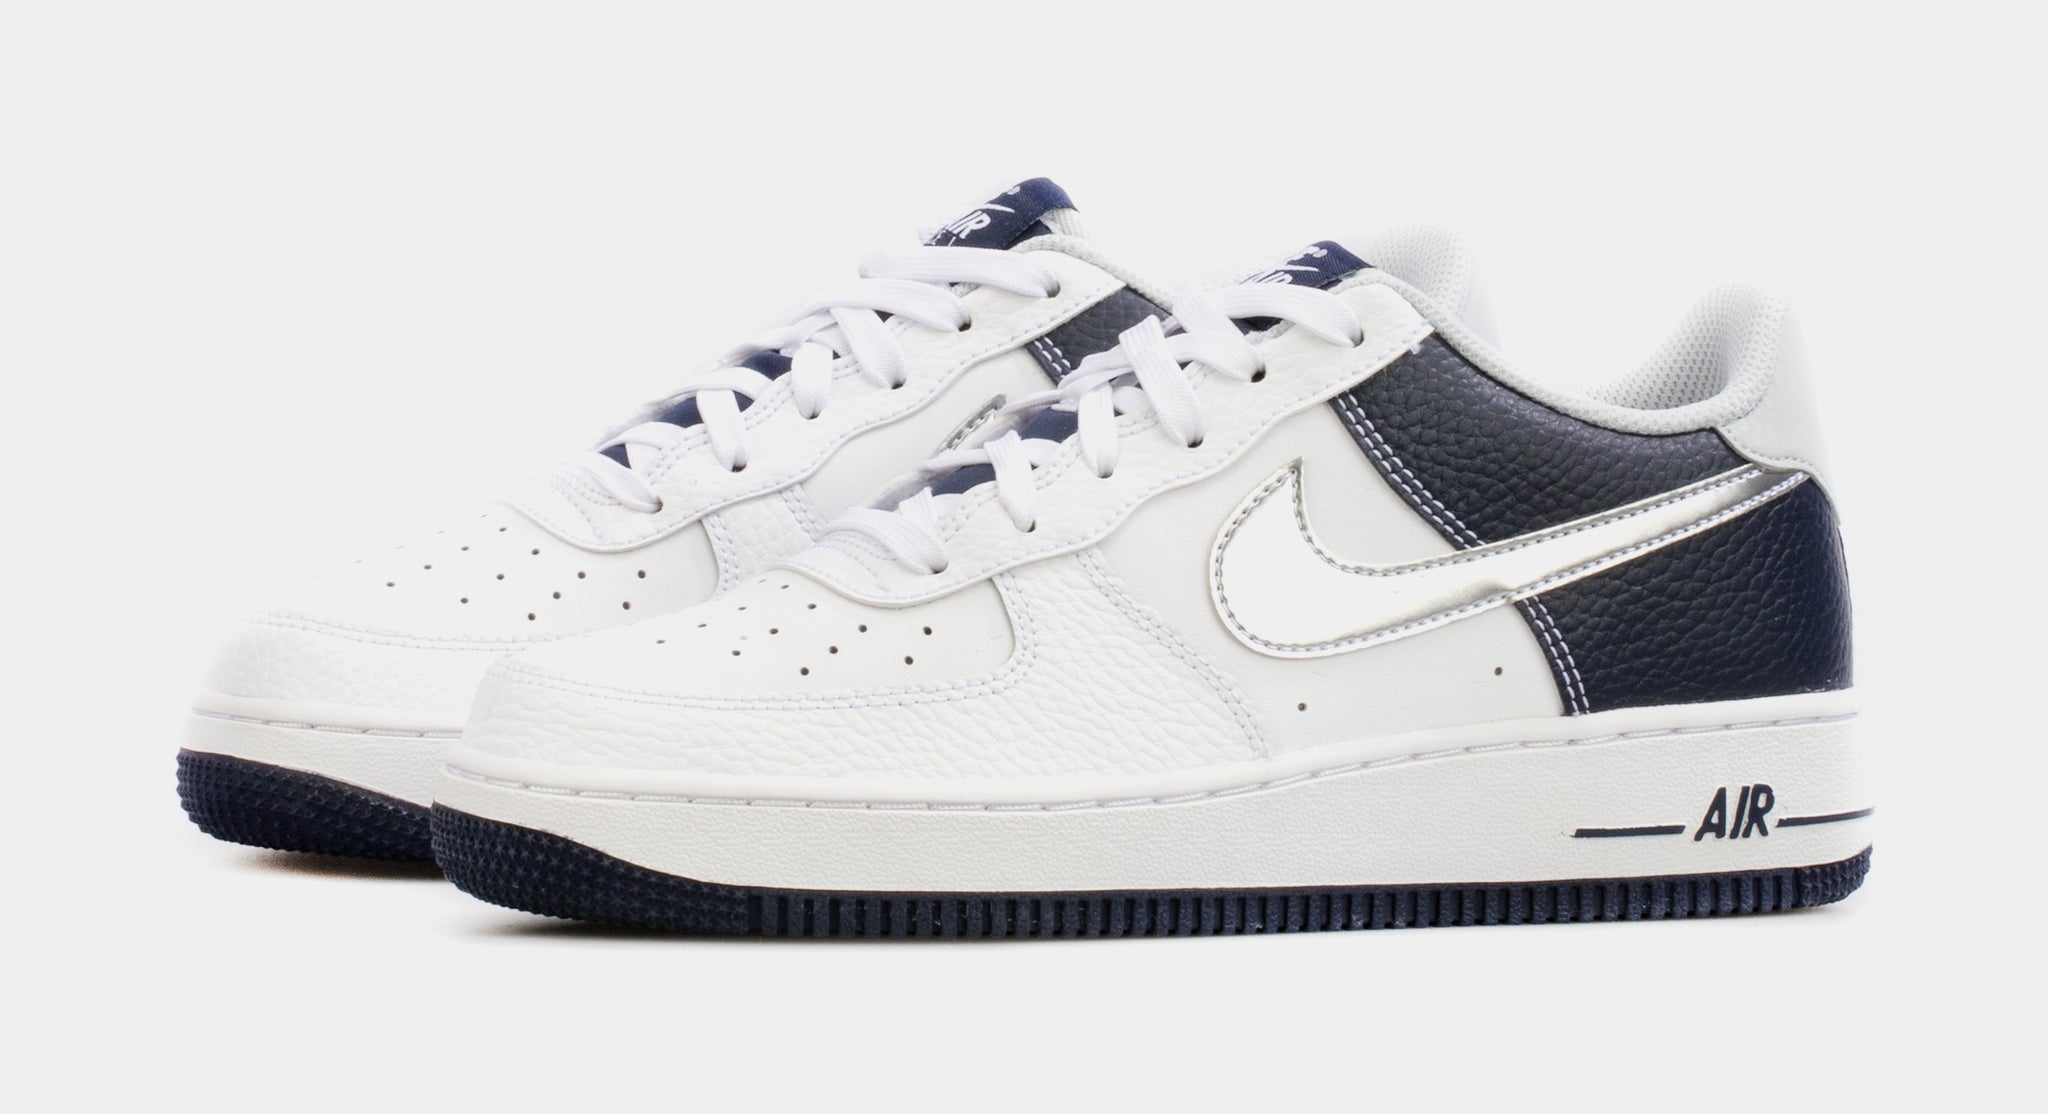 Nike Air Force 1 Low Grade School Lifestyle Shoes Black Blue